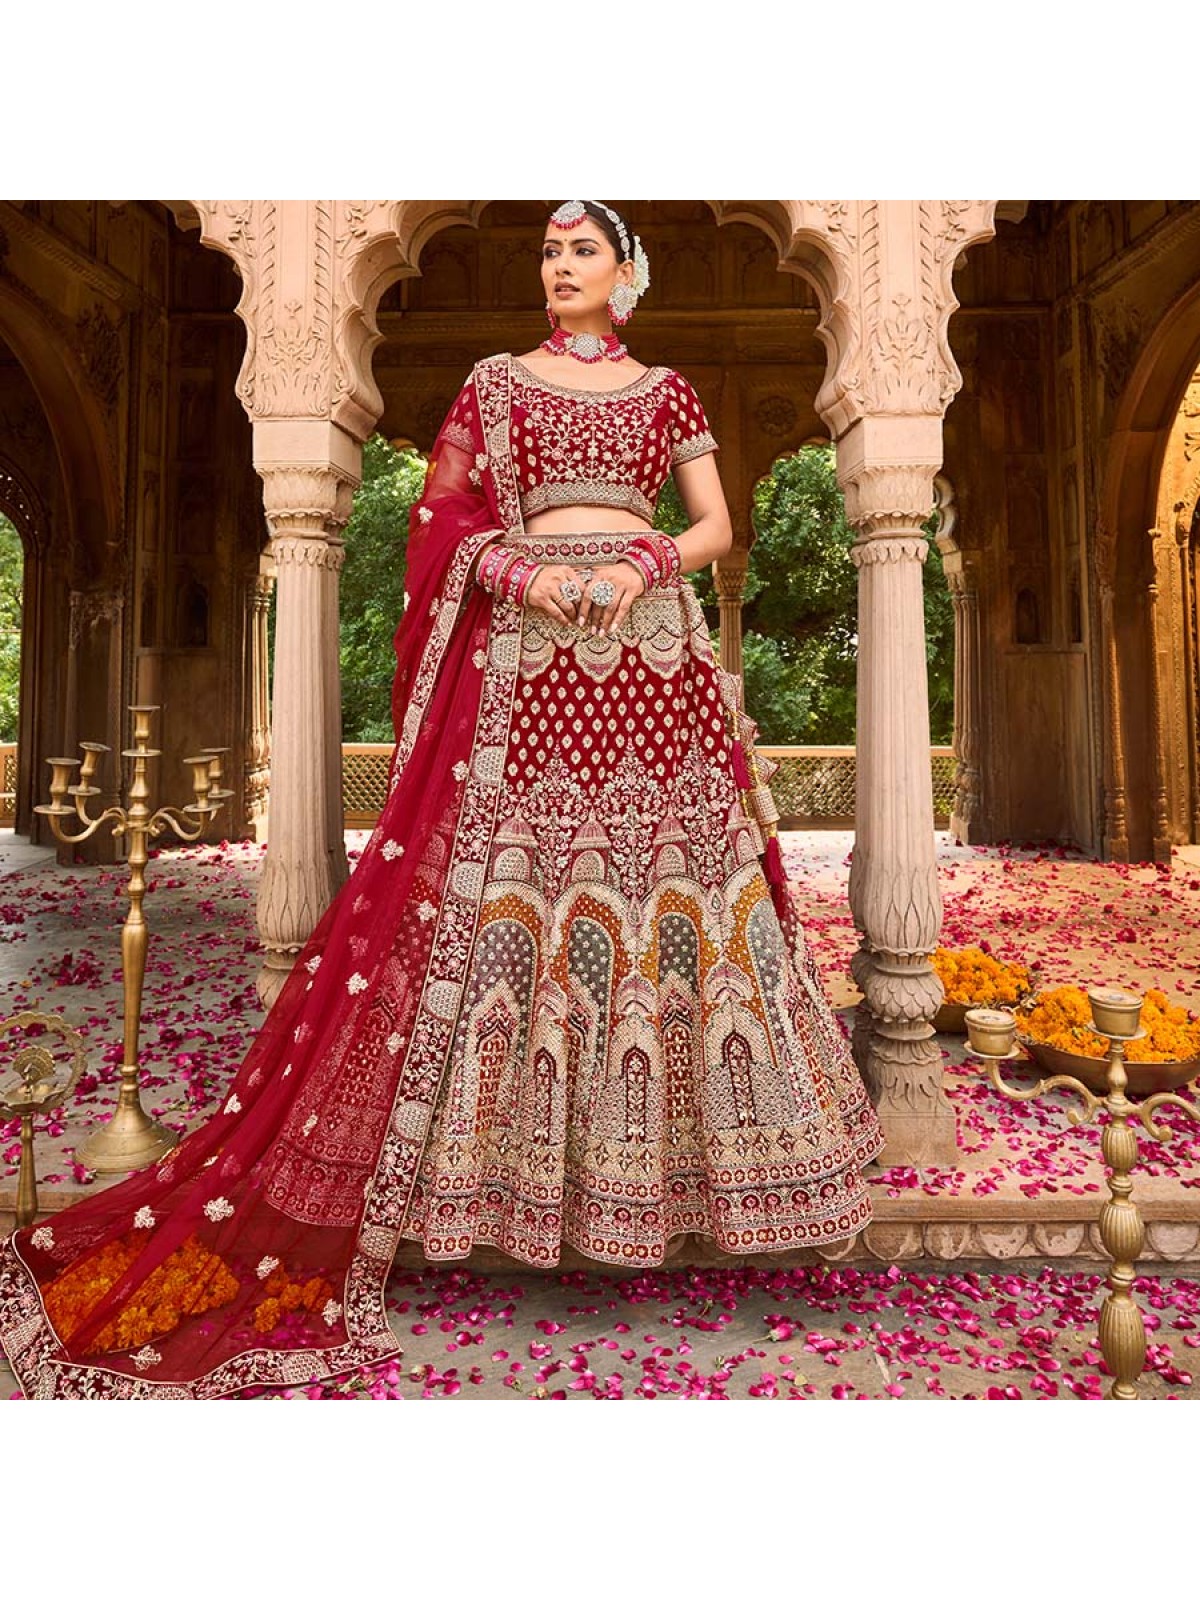 50+ Of The Most Beautiful Bridal Lehengas We Spotted On Real Brides! |  WedMeGood